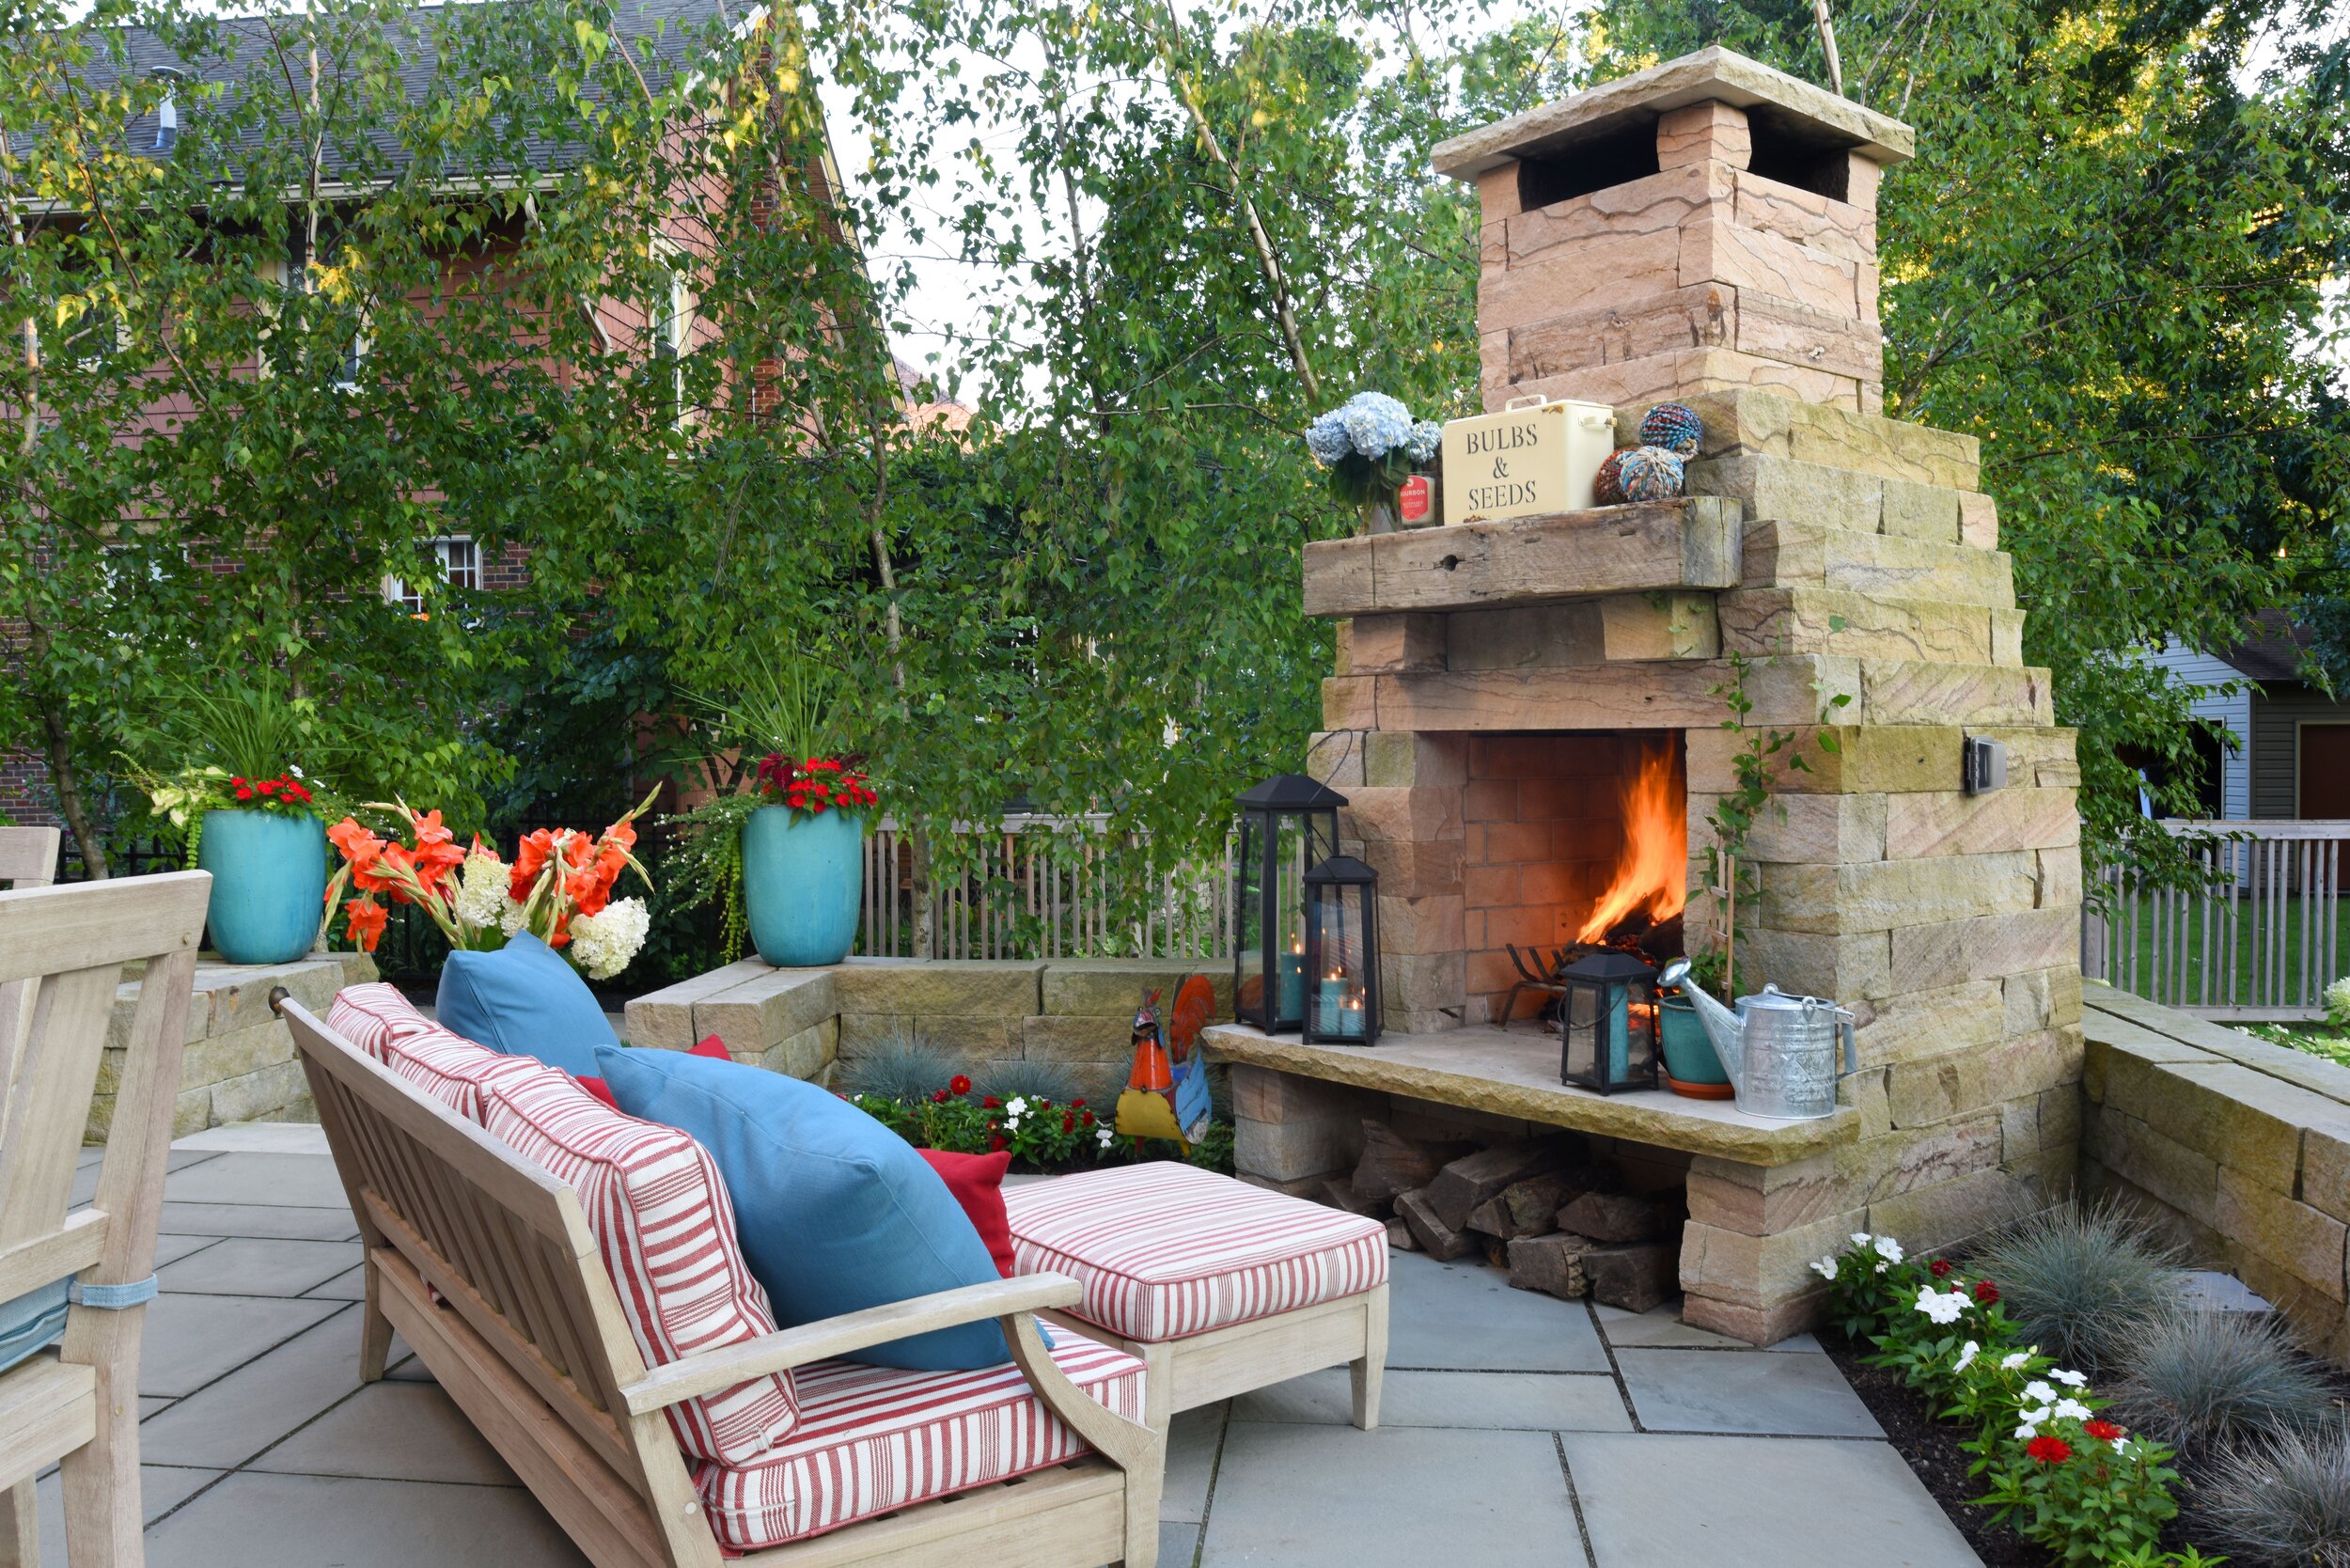 Small Outdoor Living Space Ideas